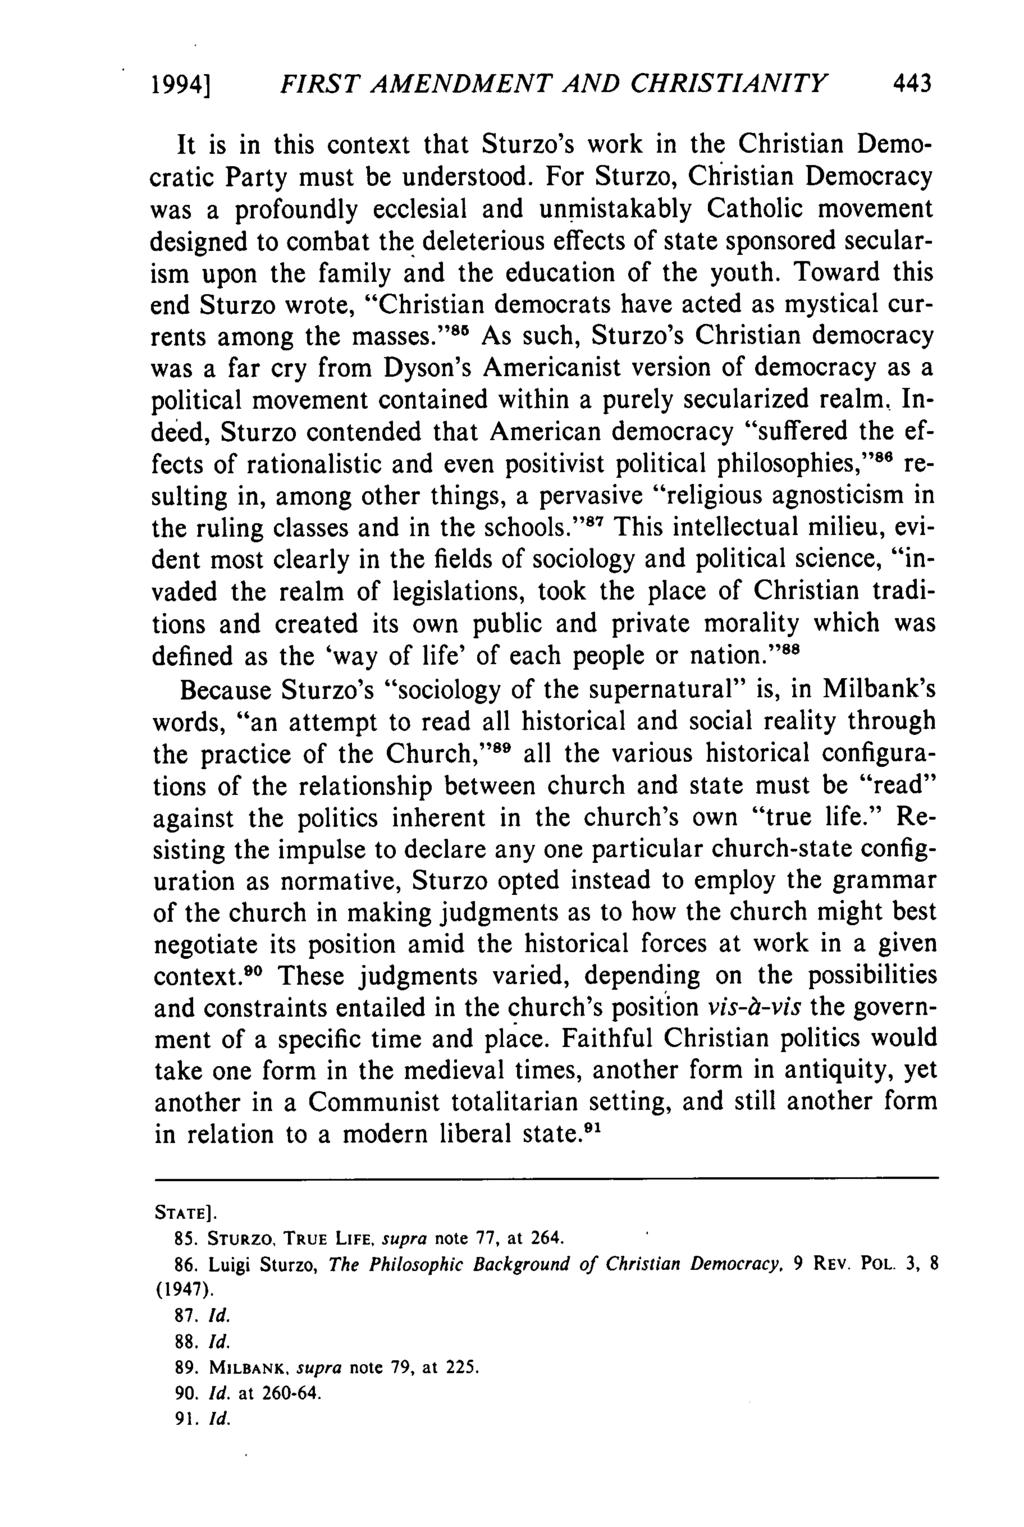 19941 FIRST AMENDMENT AND CHRISTIANITY It is in this context that Sturzo's work in the Christian Democratic Party must be understood.